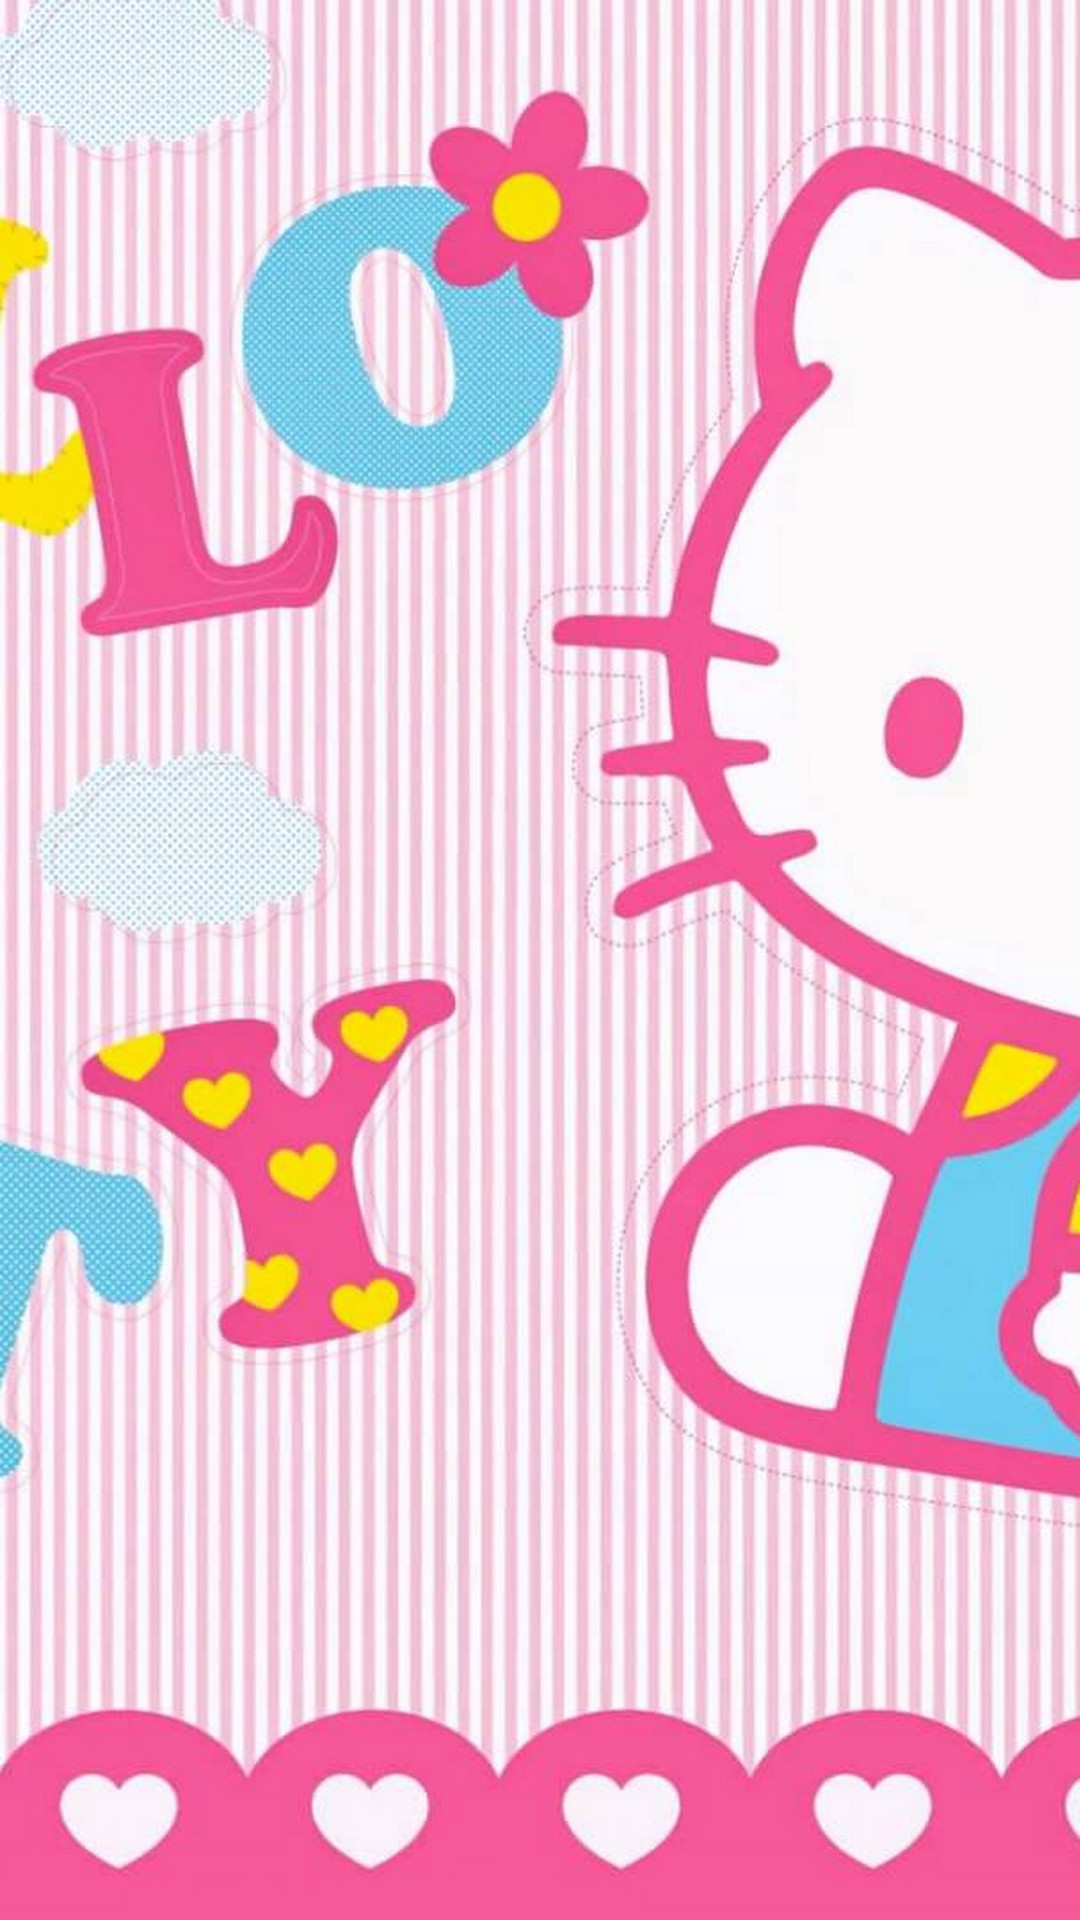 Hello Kitty Phone Backgrounds with image resolution 1080x1920 pixel. You can make this wallpaper for your Desktop Computer Backgrounds, Mac Wallpapers, Android Lock screen or iPhone Screensavers